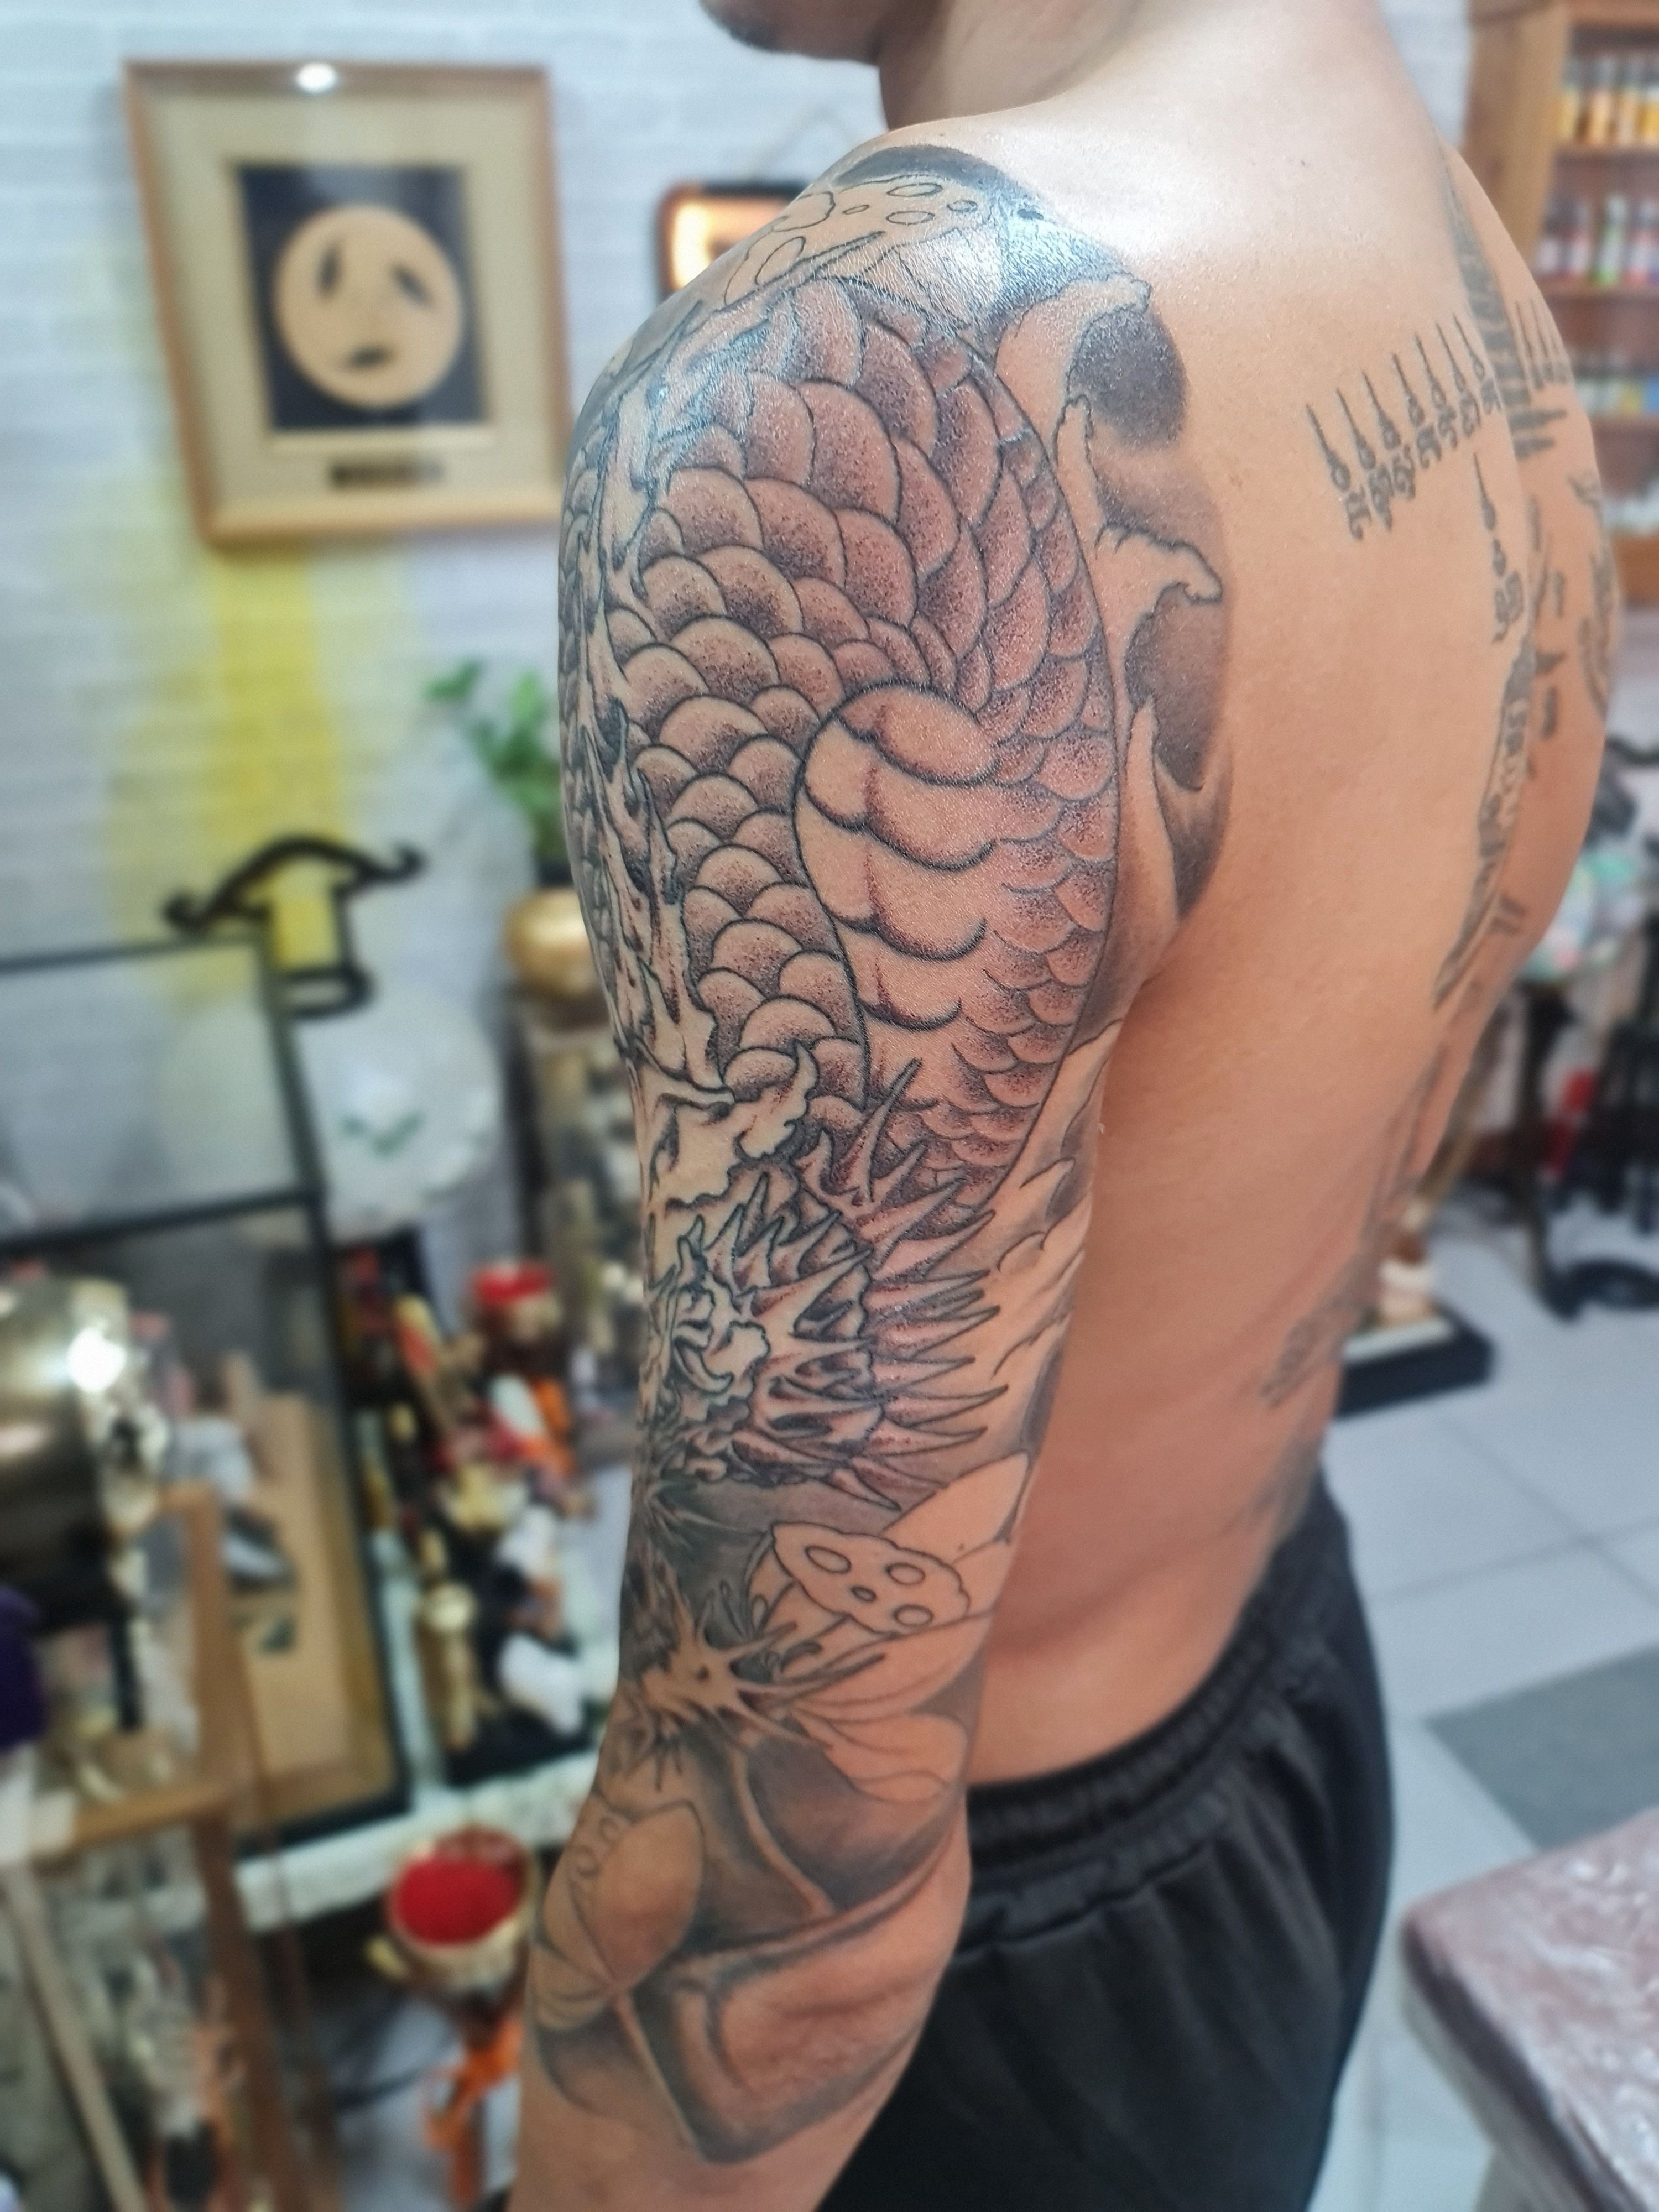 Tattoo uploaded by reggae ink aonang • Thank you 🙏🙏🙏( map tattoo) done  by Chang Artist #artwork #artistic #artists #aonang #krabi #krabitrip  #tattooartist #inked #inks #tattoos #tattooing #tattooed #tattoo2me  #tattooart #tattooink #inkedup #